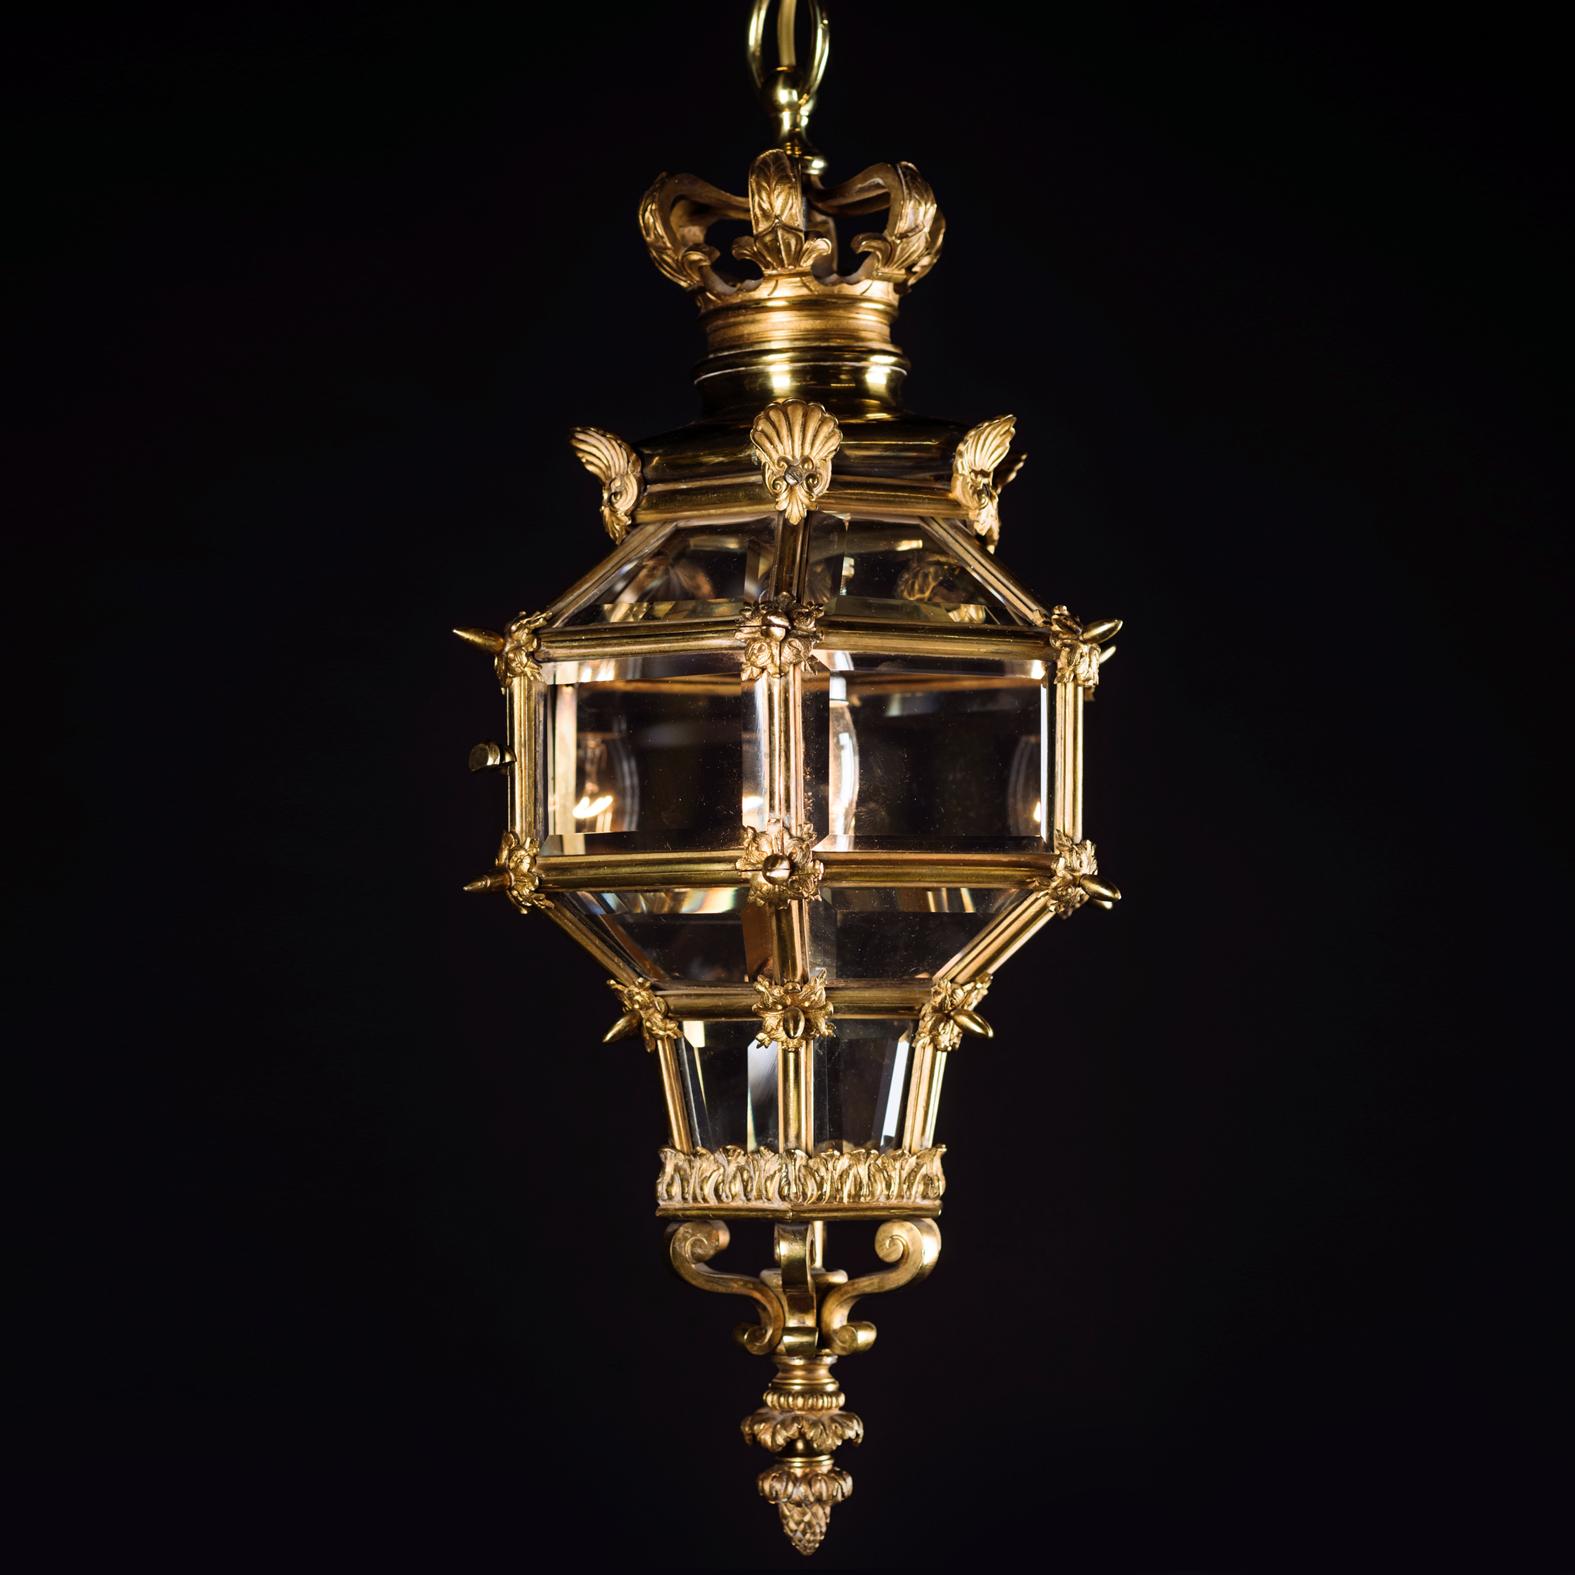 A small Louis XVI style gilt bronze lantern modelled after the Versailles Model.

Of hexagonal form surmounted by a corona cast with fleur-de-lys and scallop shells. 

French, circa 1900.